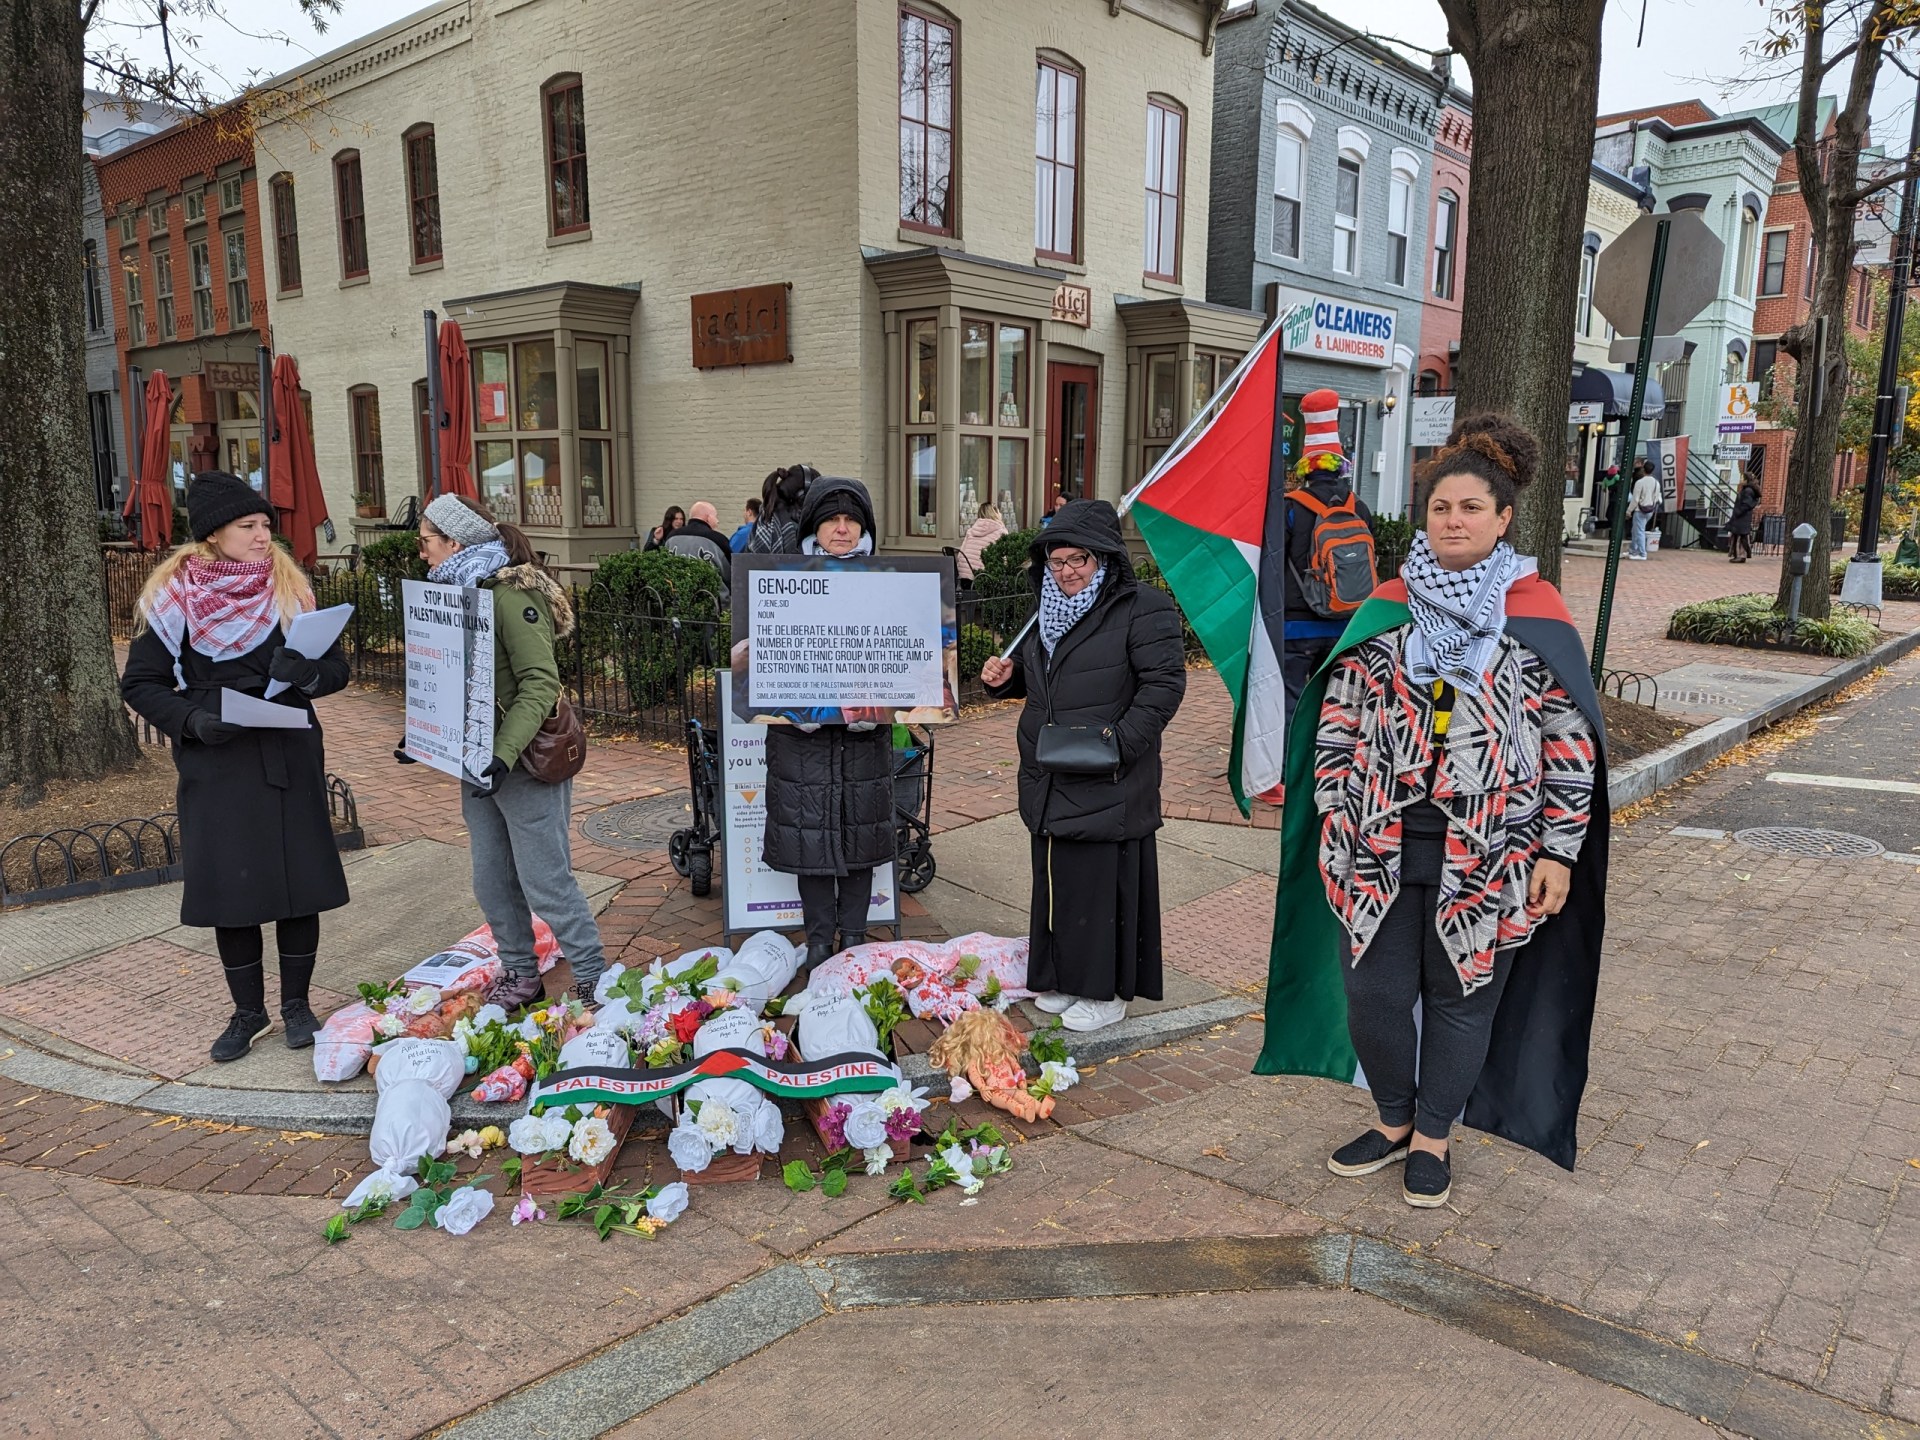 Group stages ‘die-ins’ across Washington, DC to raise awareness for Gaza